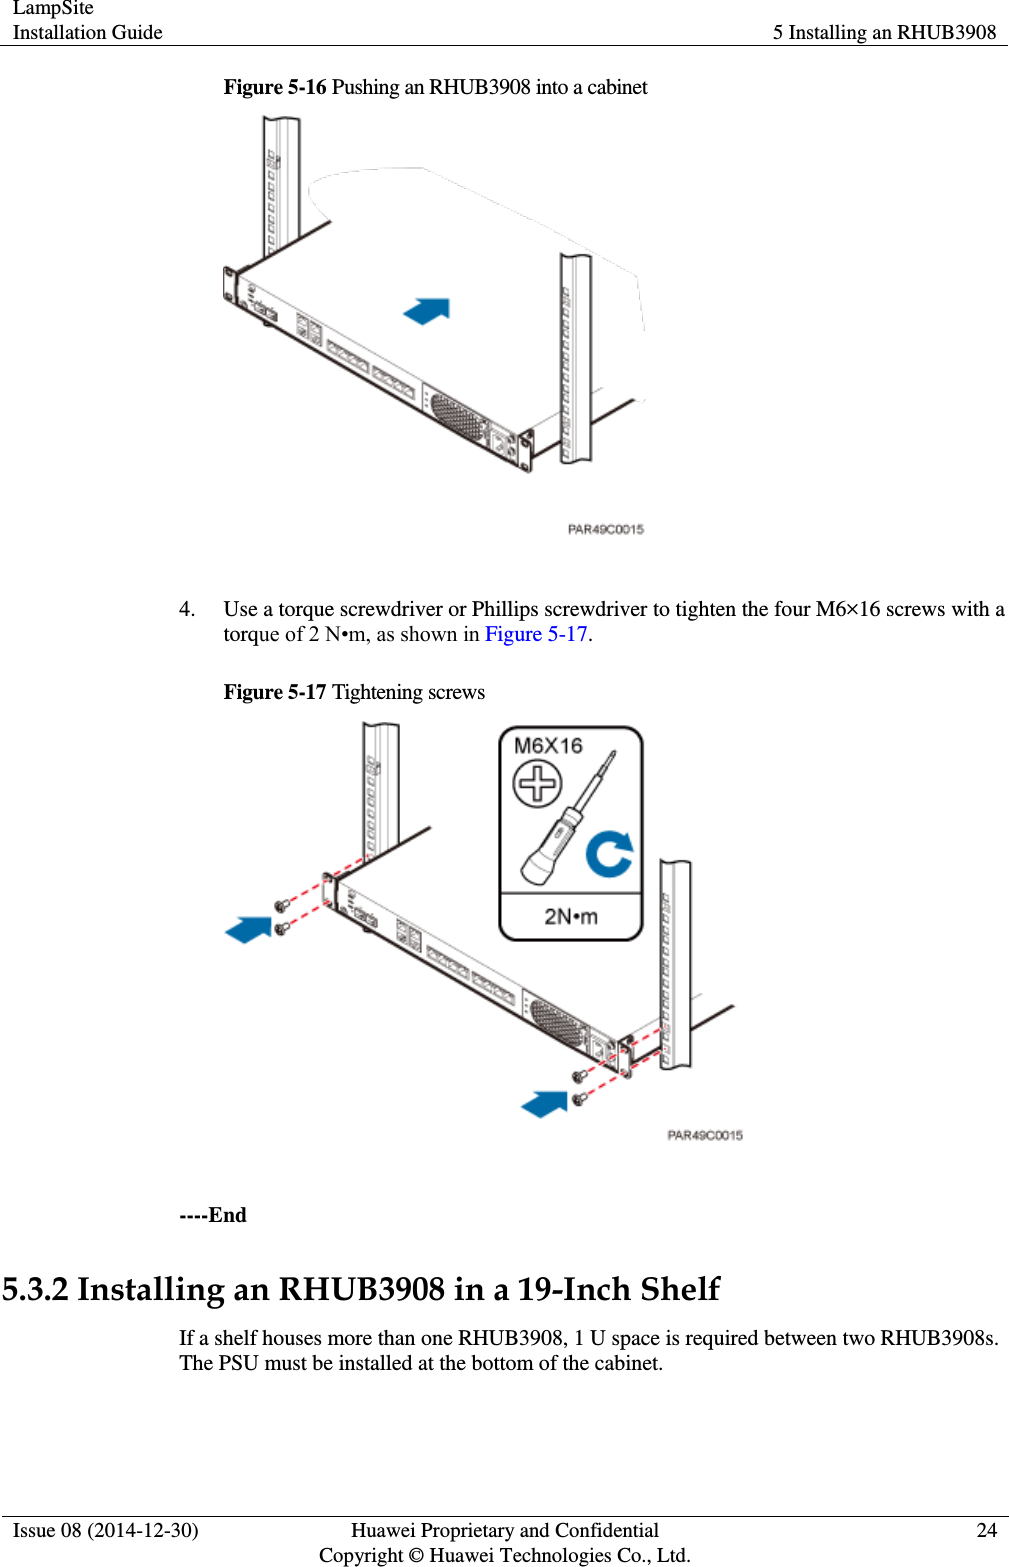 LampSite Installation Guide 5 Installing an RHUB3908  Issue 08 (2014-12-30) Huawei Proprietary and Confidential                                     Copyright © Huawei Technologies Co., Ltd. 24  Figure 5-16 Pushing an RHUB3908 into a cabinet   4. Use a torque screwdriver or Phillips screwdriver to tighten the four M6×16 screws with a torque of 2 N•m, as shown in Figure 5-17.   Figure 5-17 Tightening screws   ----End 5.3.2 Installing an RHUB3908 in a 19-Inch Shelf If a shelf houses more than one RHUB3908, 1 U space is required between two RHUB3908s. The PSU must be installed at the bottom of the cabinet.   